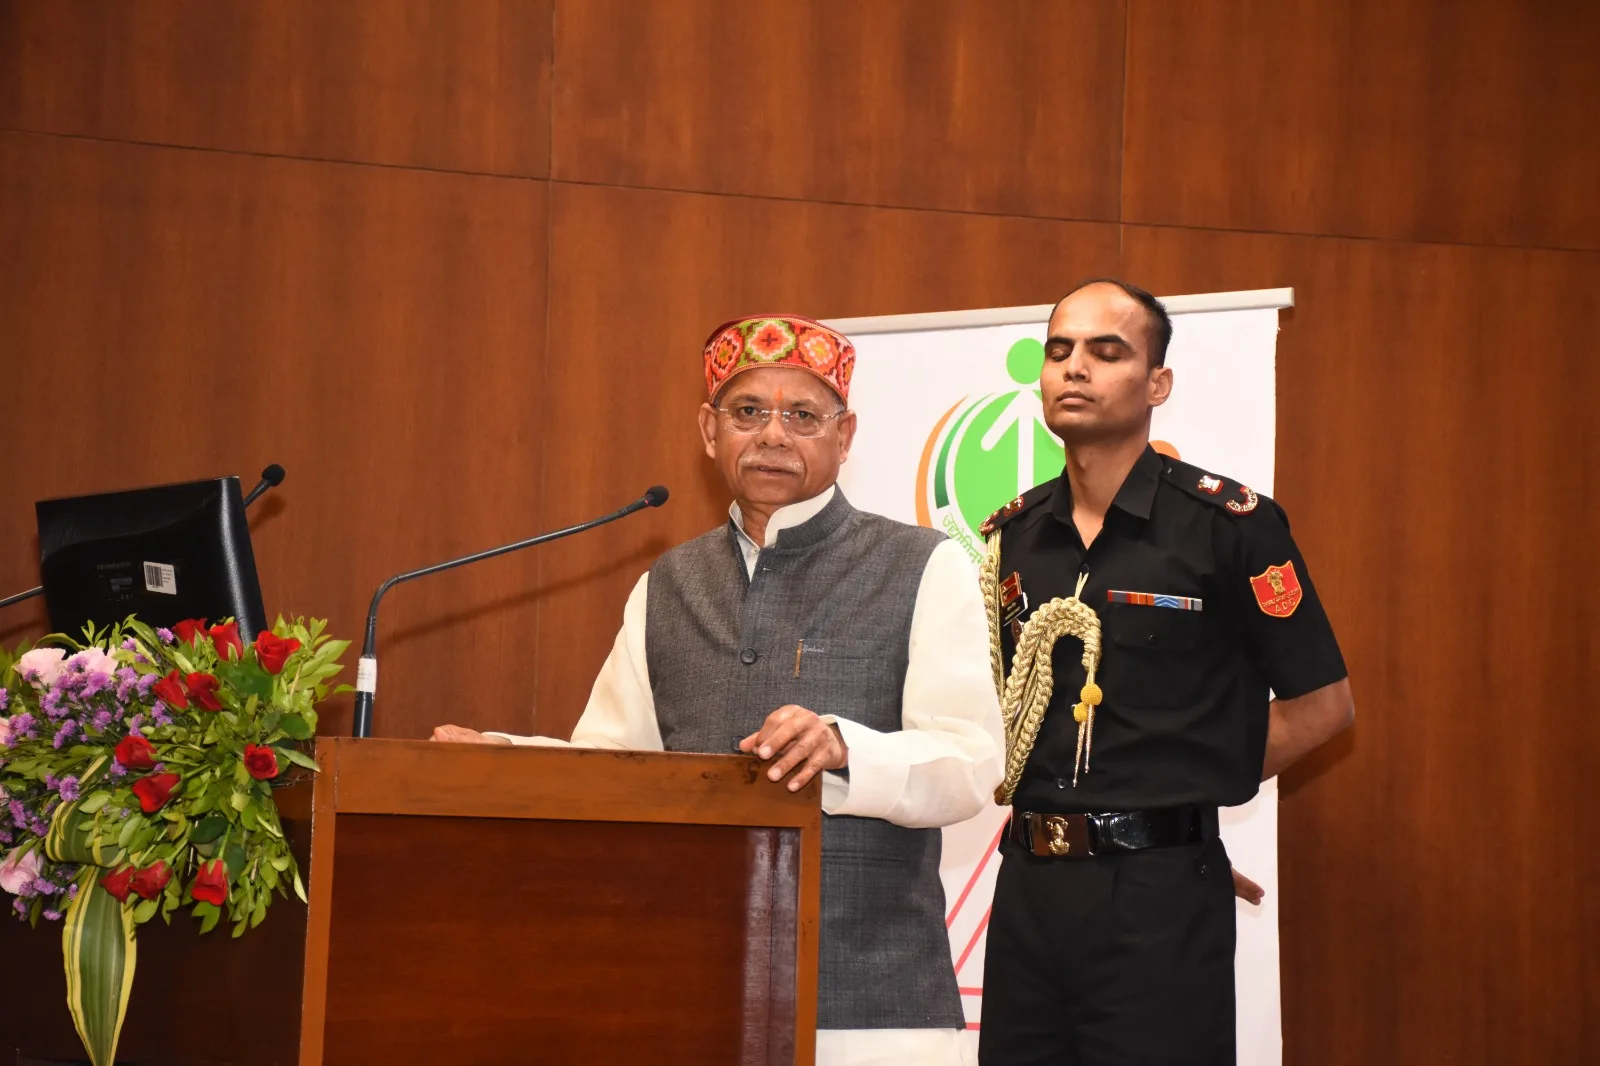 Hon'ble Governor of Himachal Pradesh delivers special lecture on 'Amrit Kaal ka Bharat' at EDII